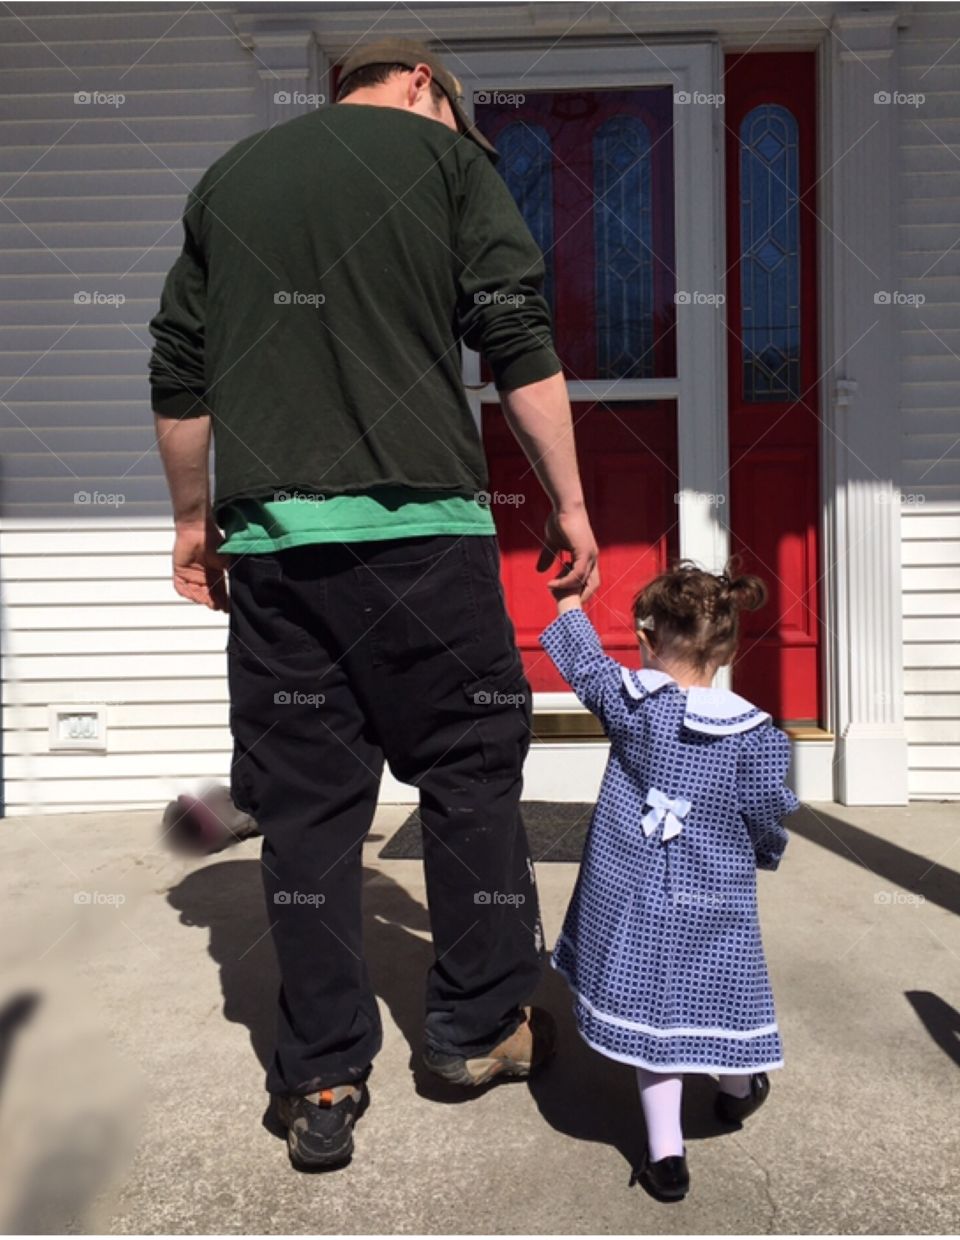 Just a girl and her dad on Easter walking together 